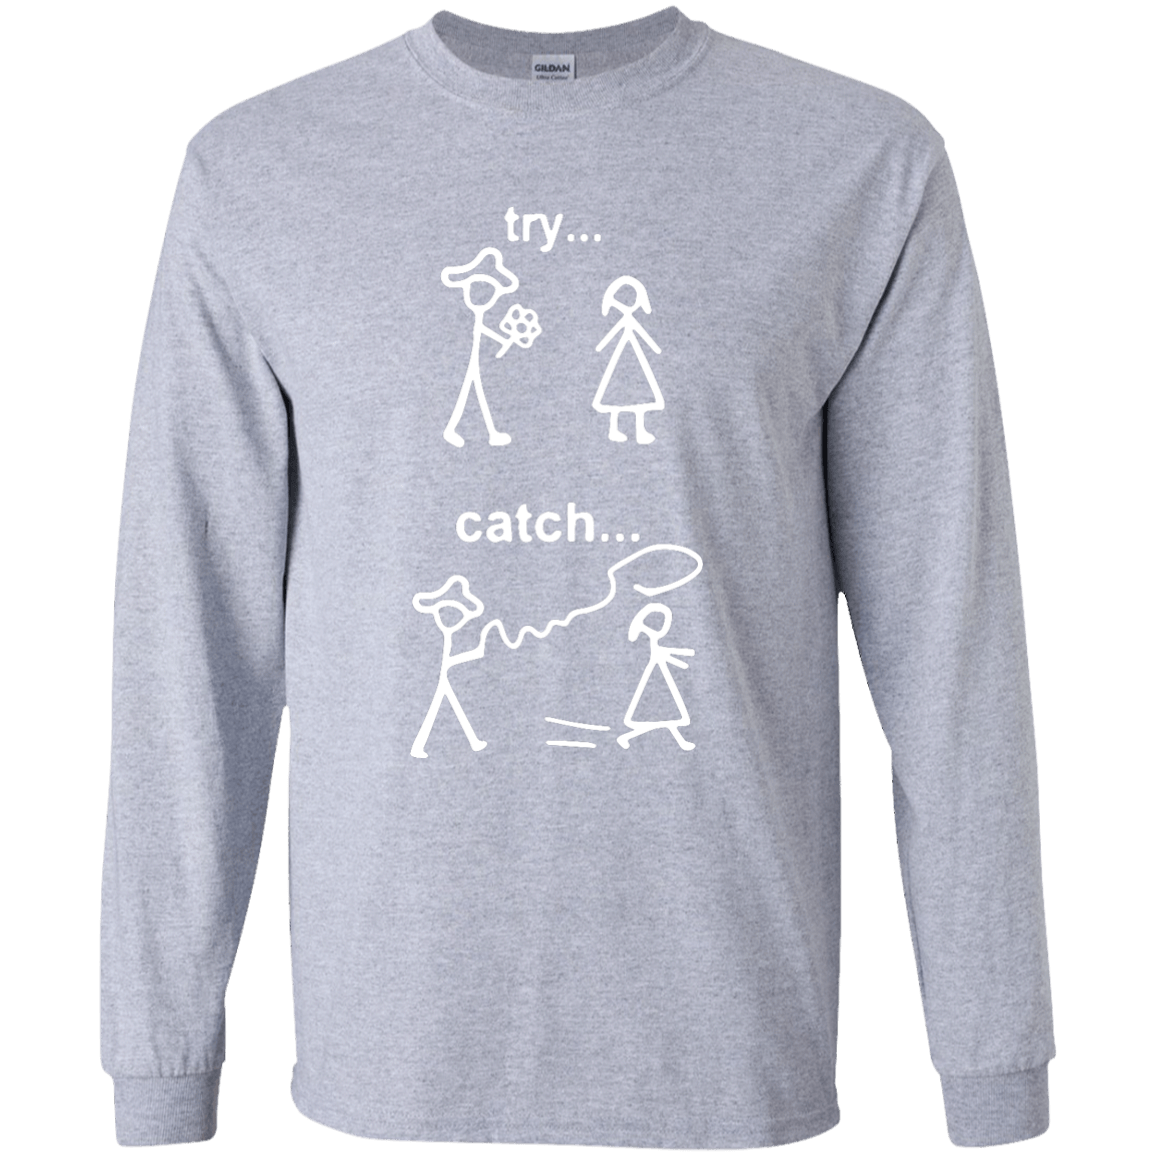 1 in No. | catch Programming T-Shirts Tee++ try –